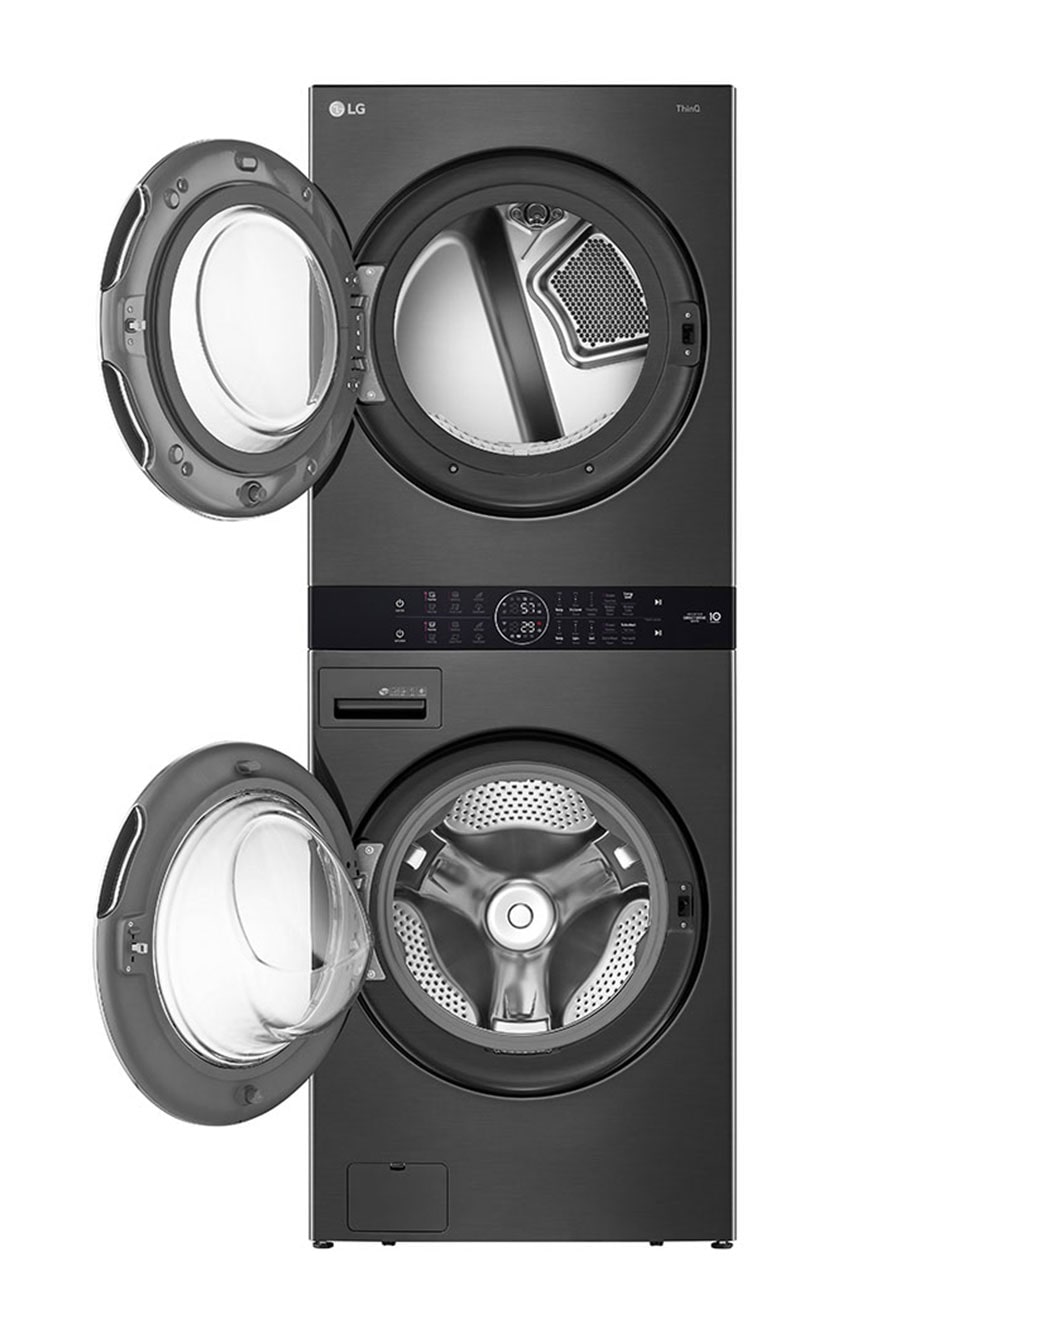 lg-single-unit-front-load-lg-washtower-with-center-control-4-5-cu-ft